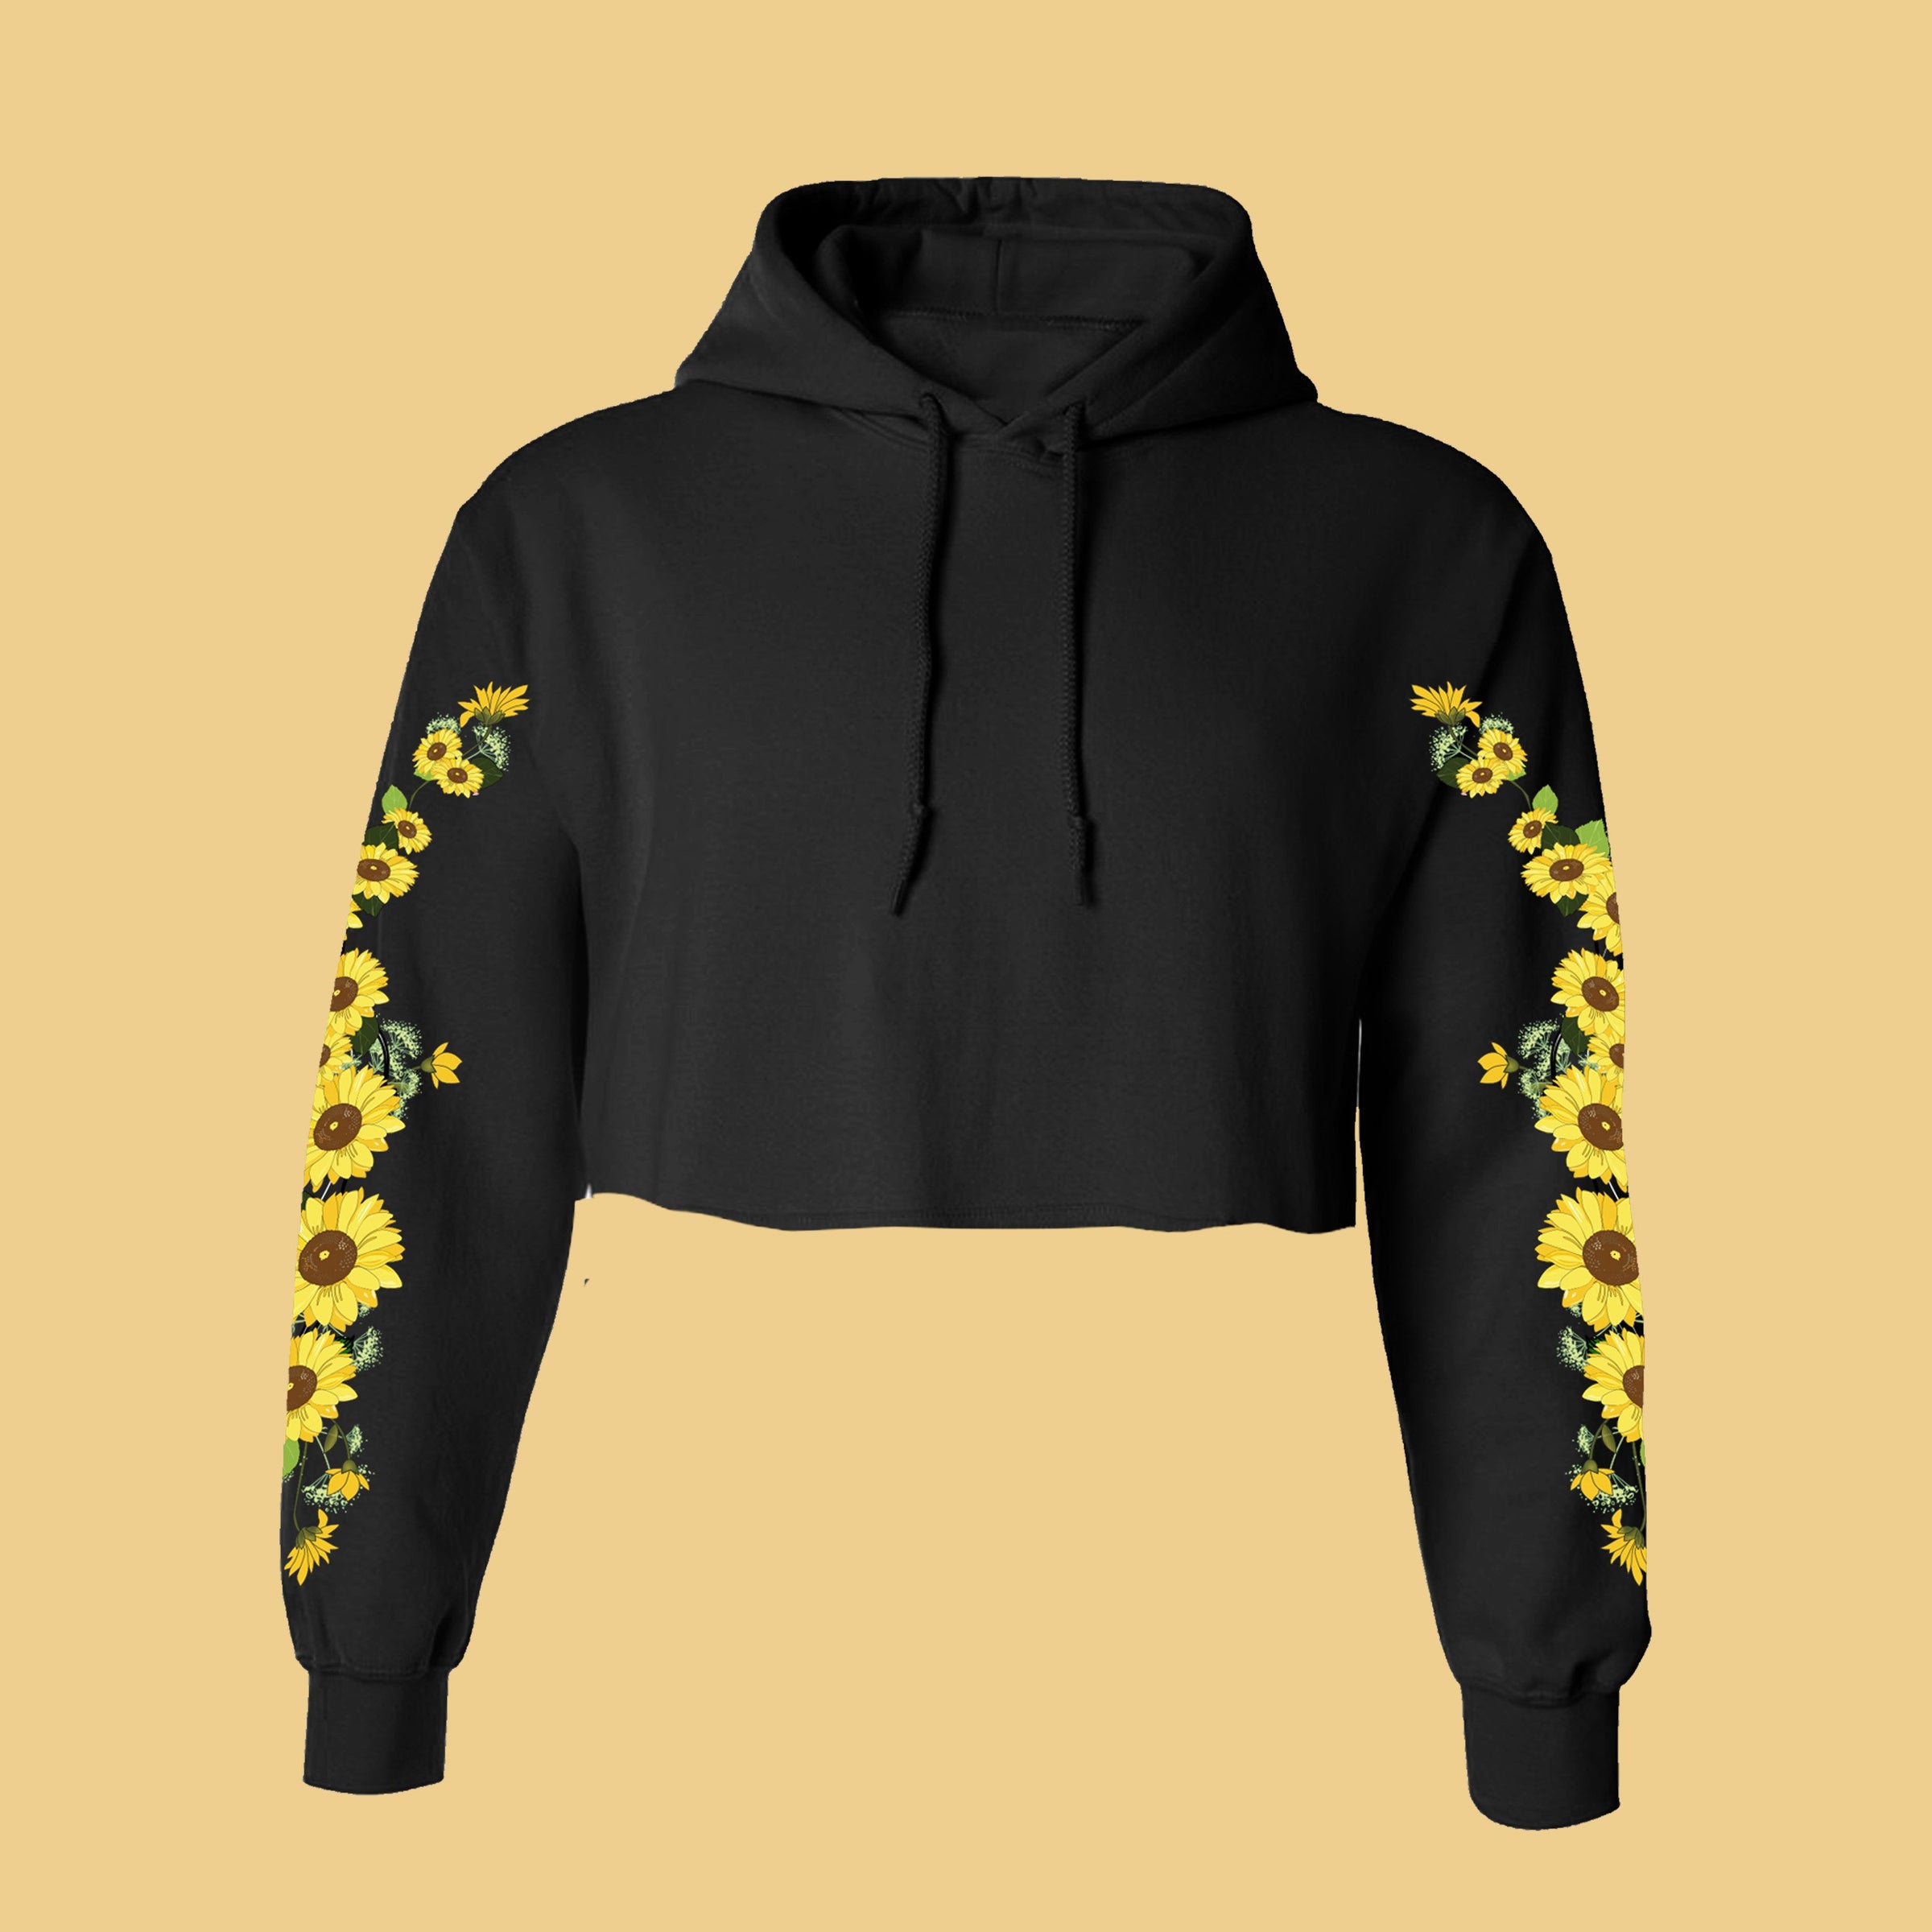 yellow hoodie with sunflowers on sleeves